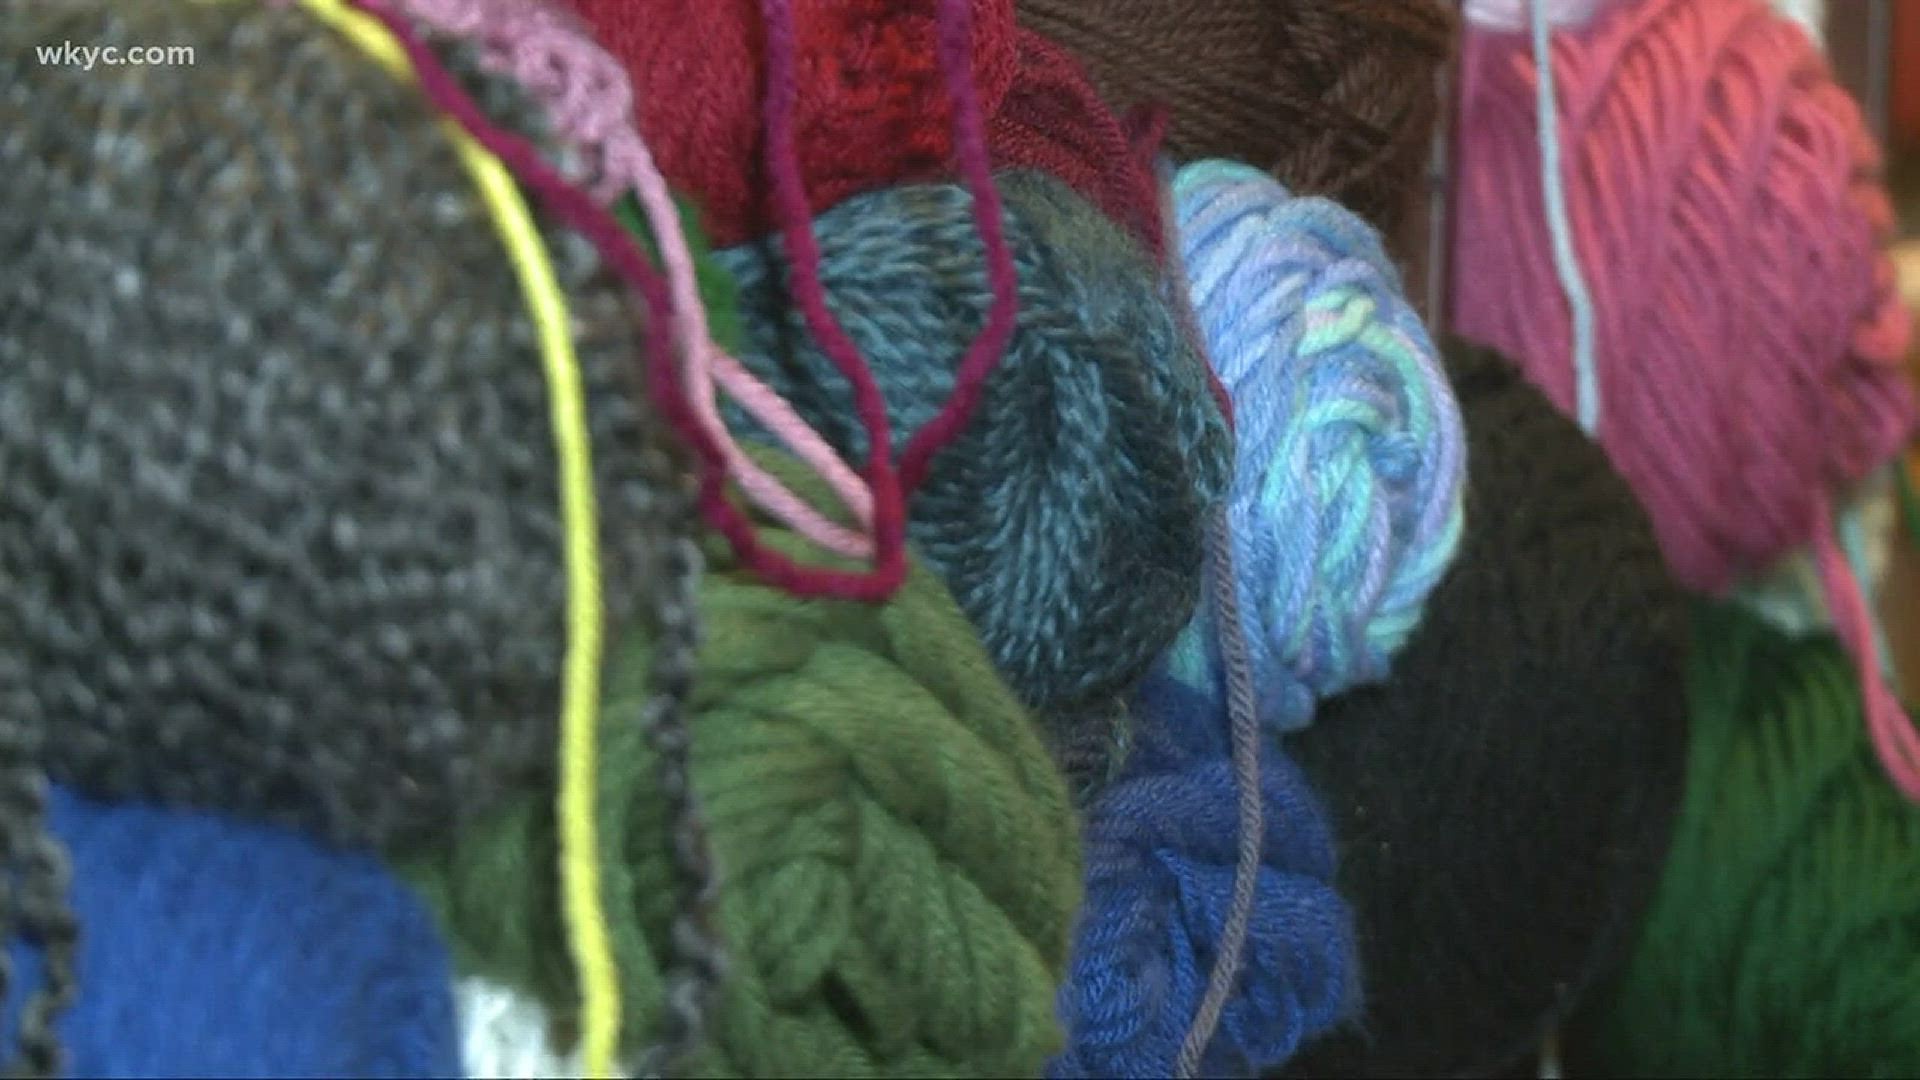 Local woman pledges to make afghans for those in Hospice